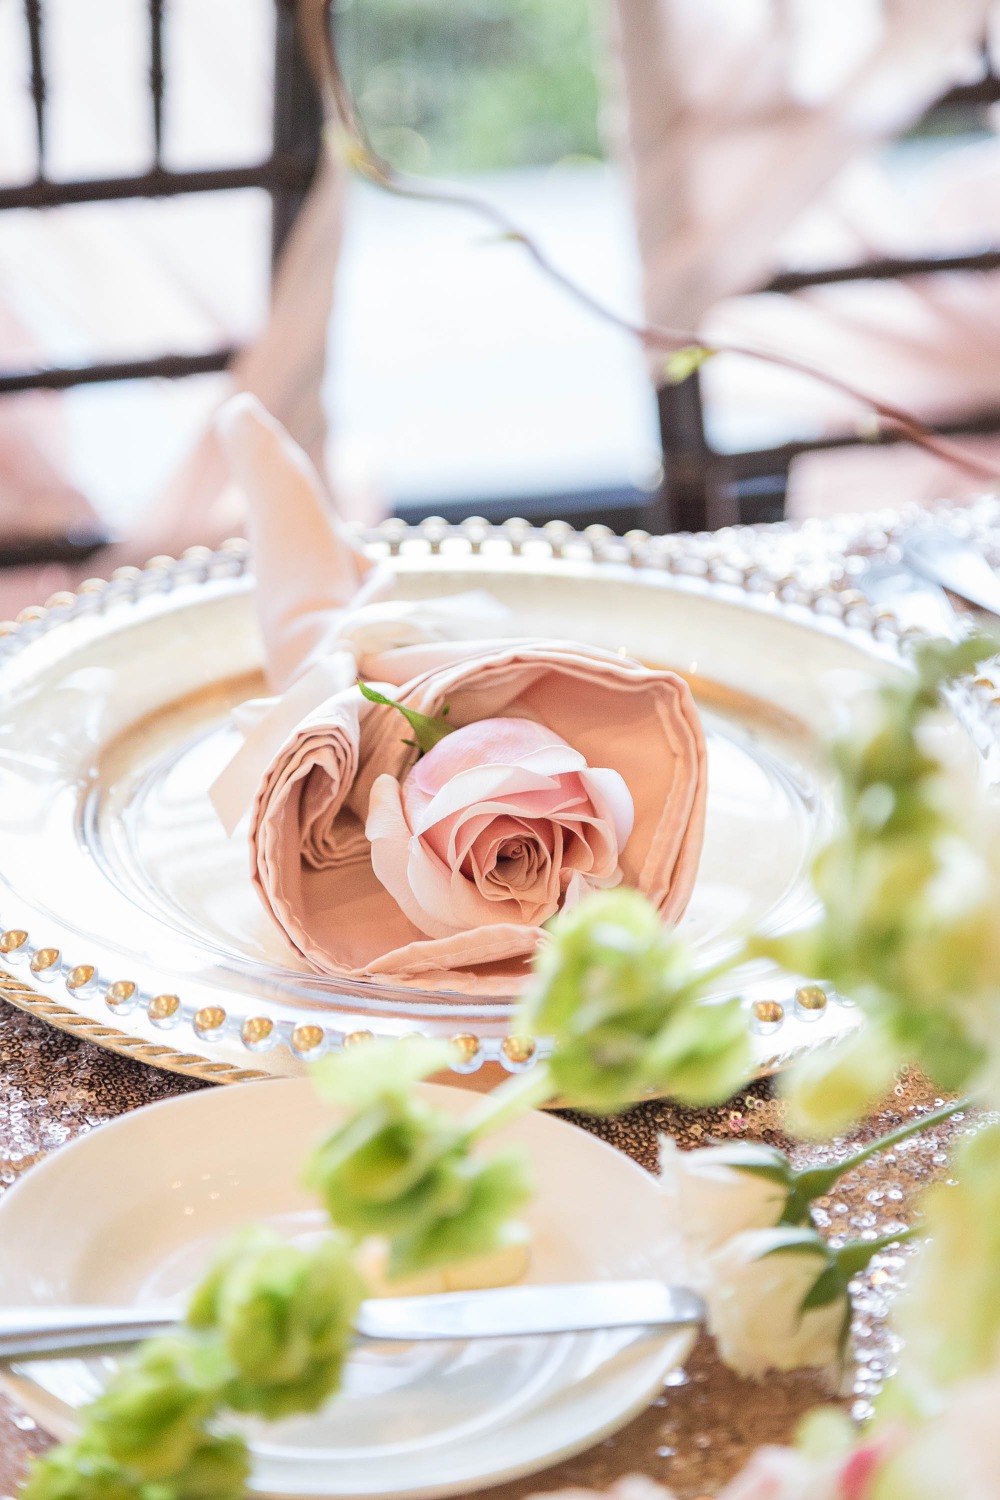 pink rose at every place setting